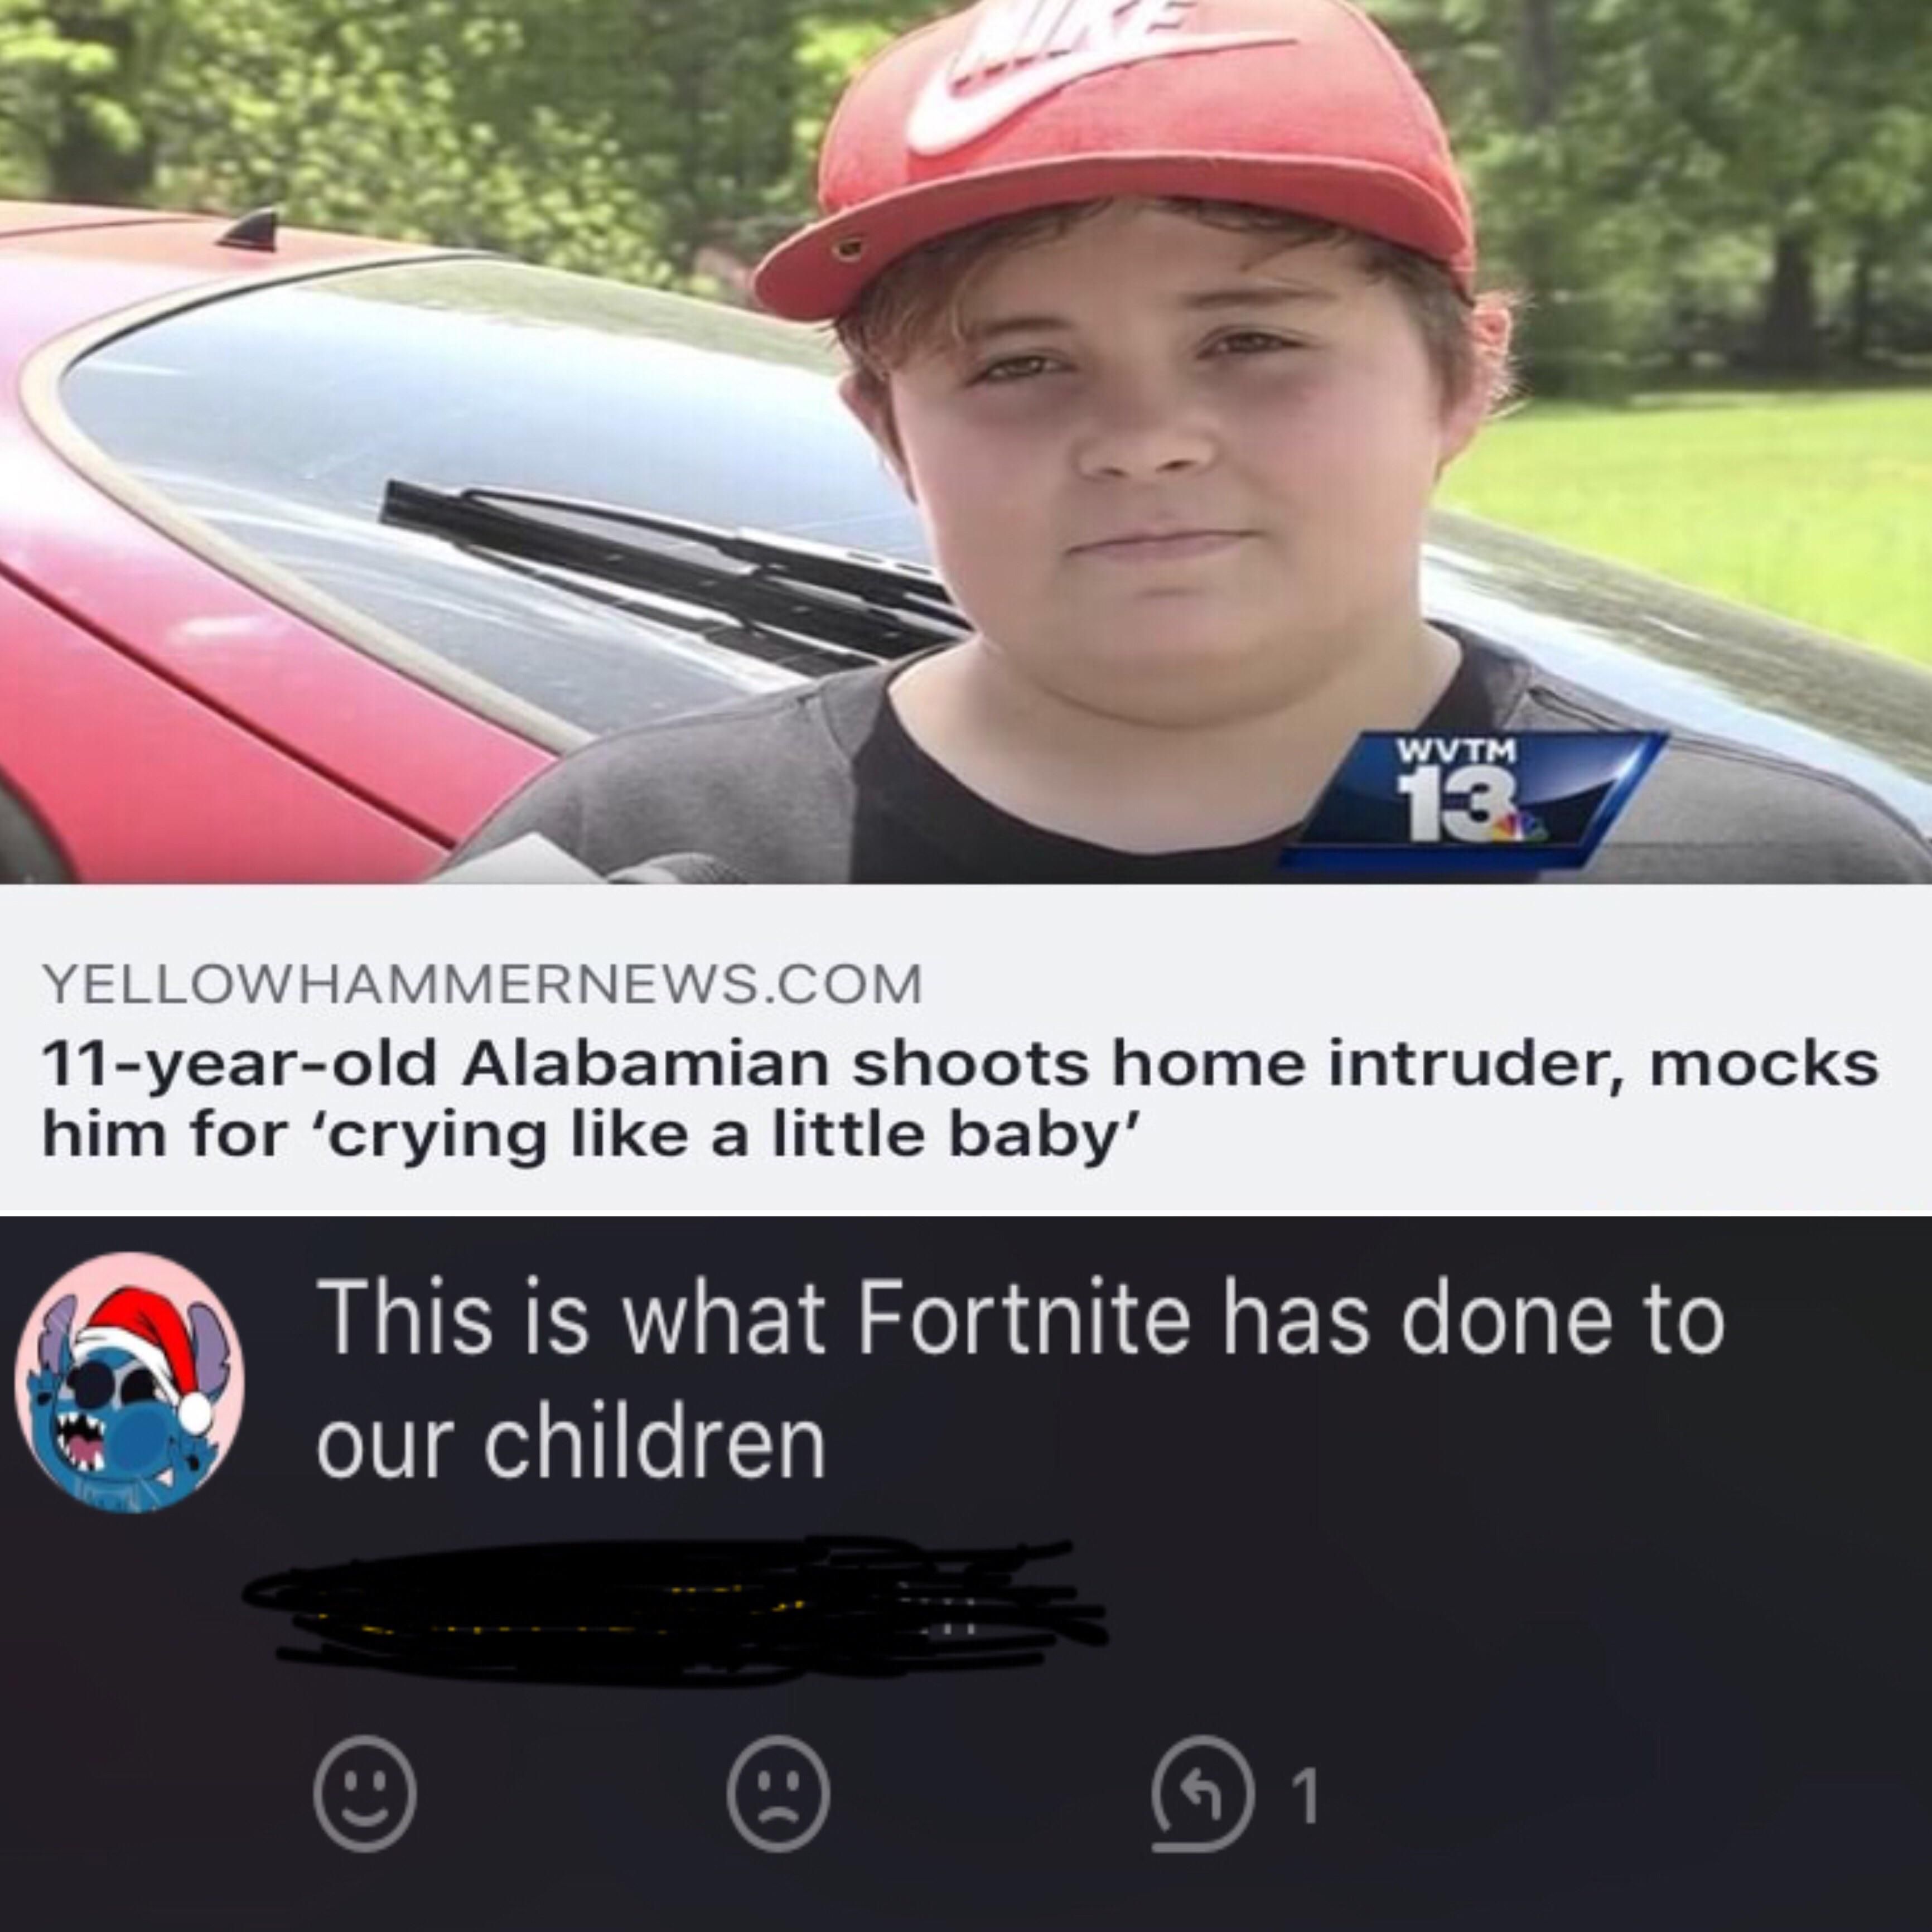 Hit it with the Abortnite.